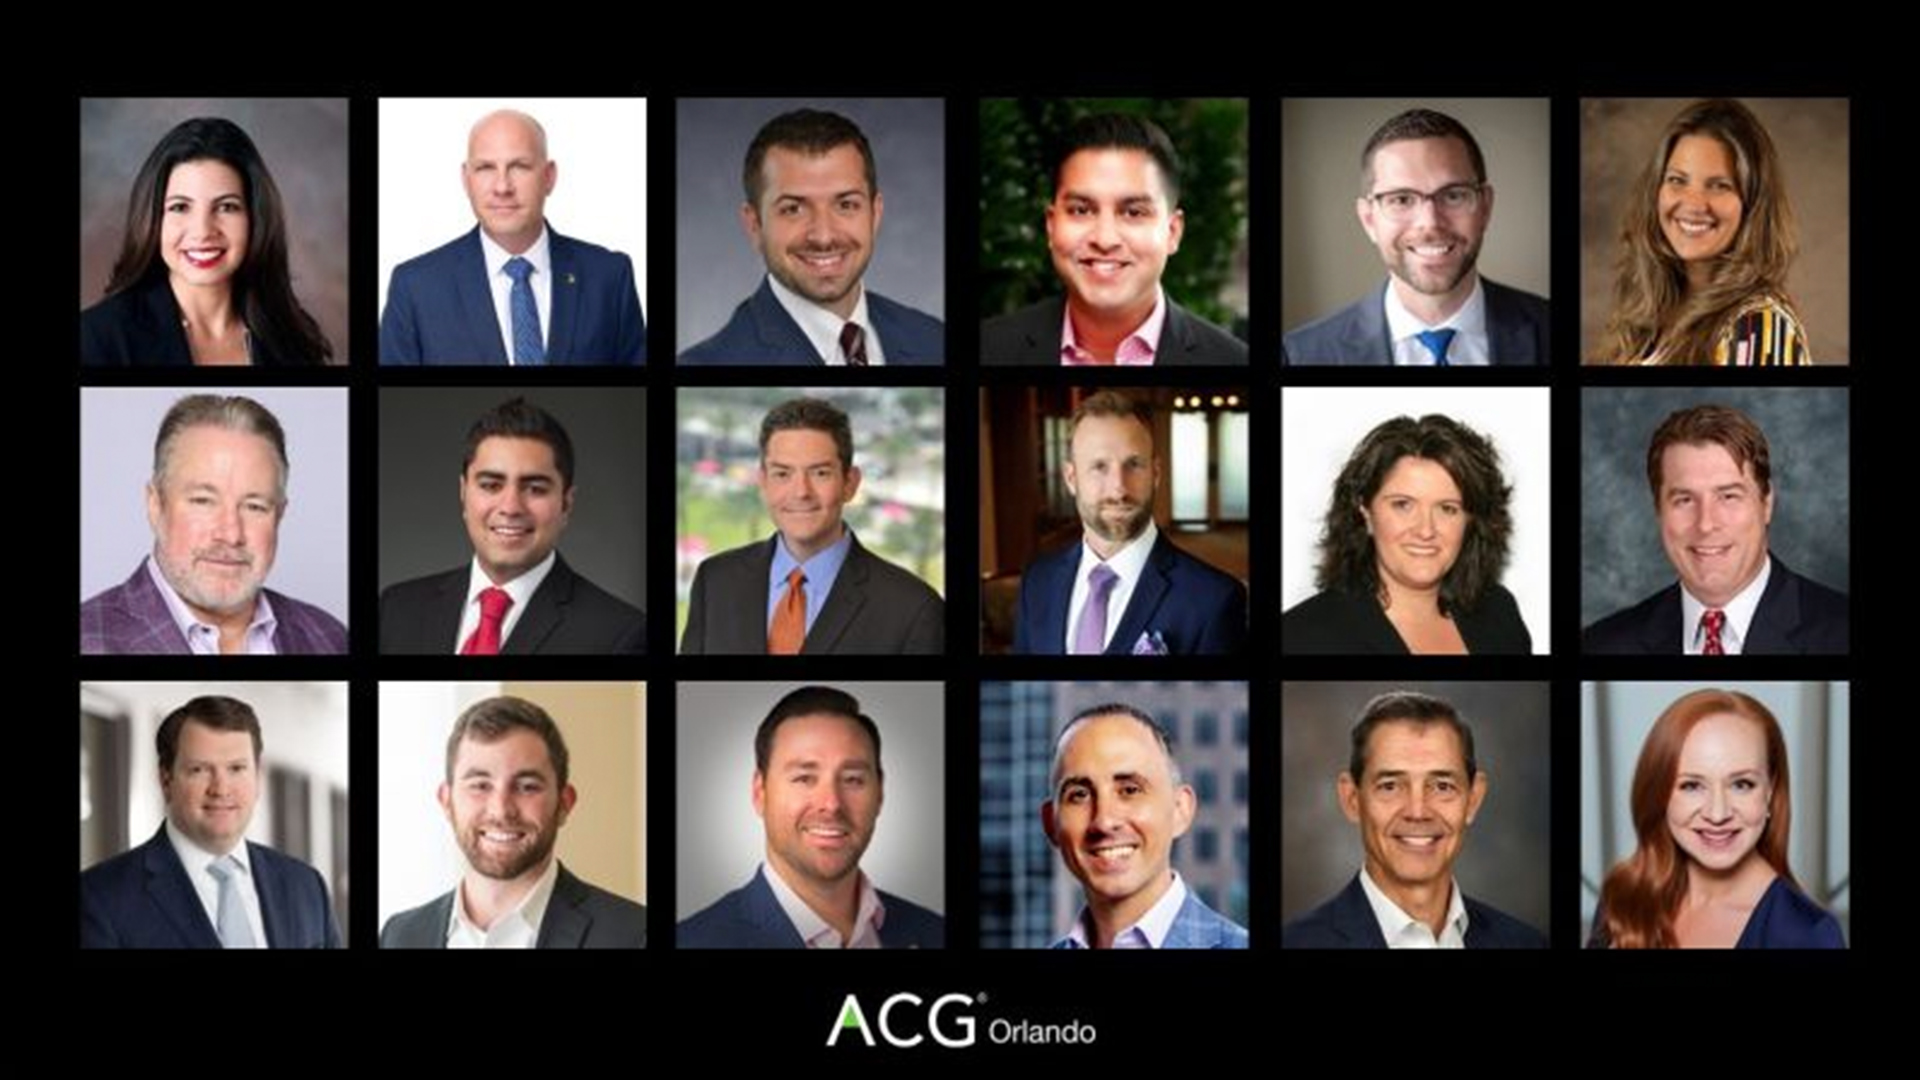 ACG Orlando Board Mergers & Acquisitions Networking Opportunities